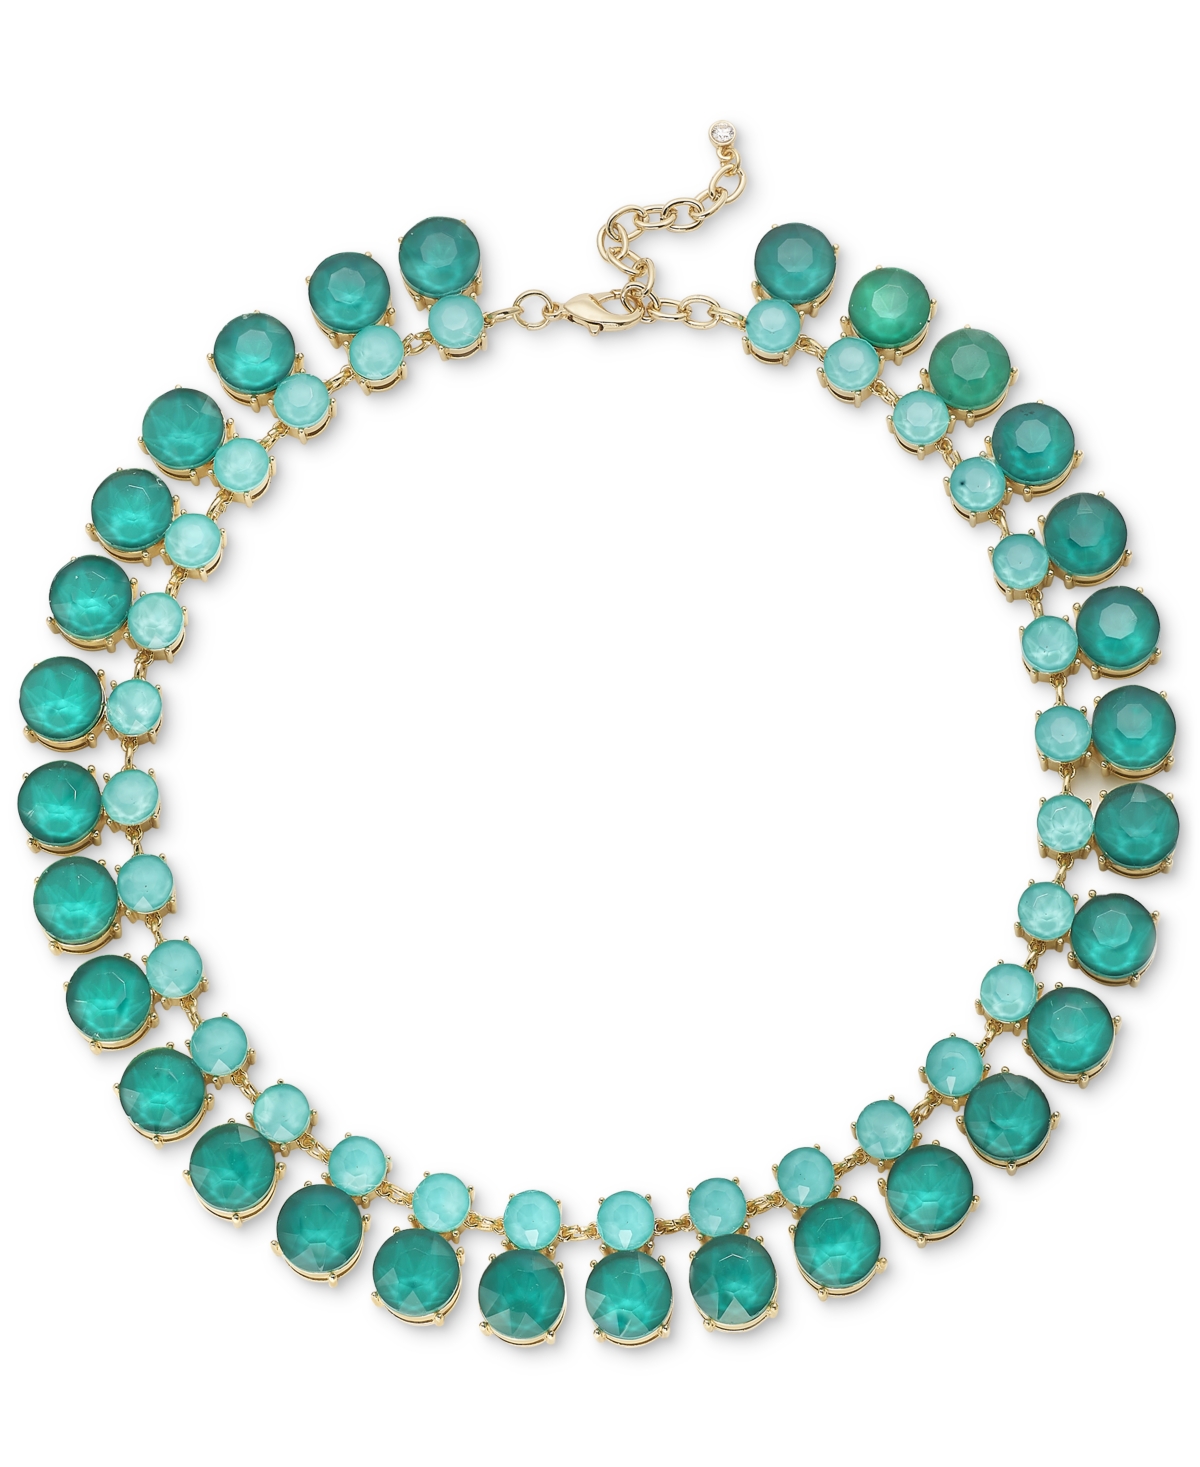 Gold-Tone Color Crystal & Stone All-Around Collar Necklace, 16" + 2" extender, Created for Macy's - Blue